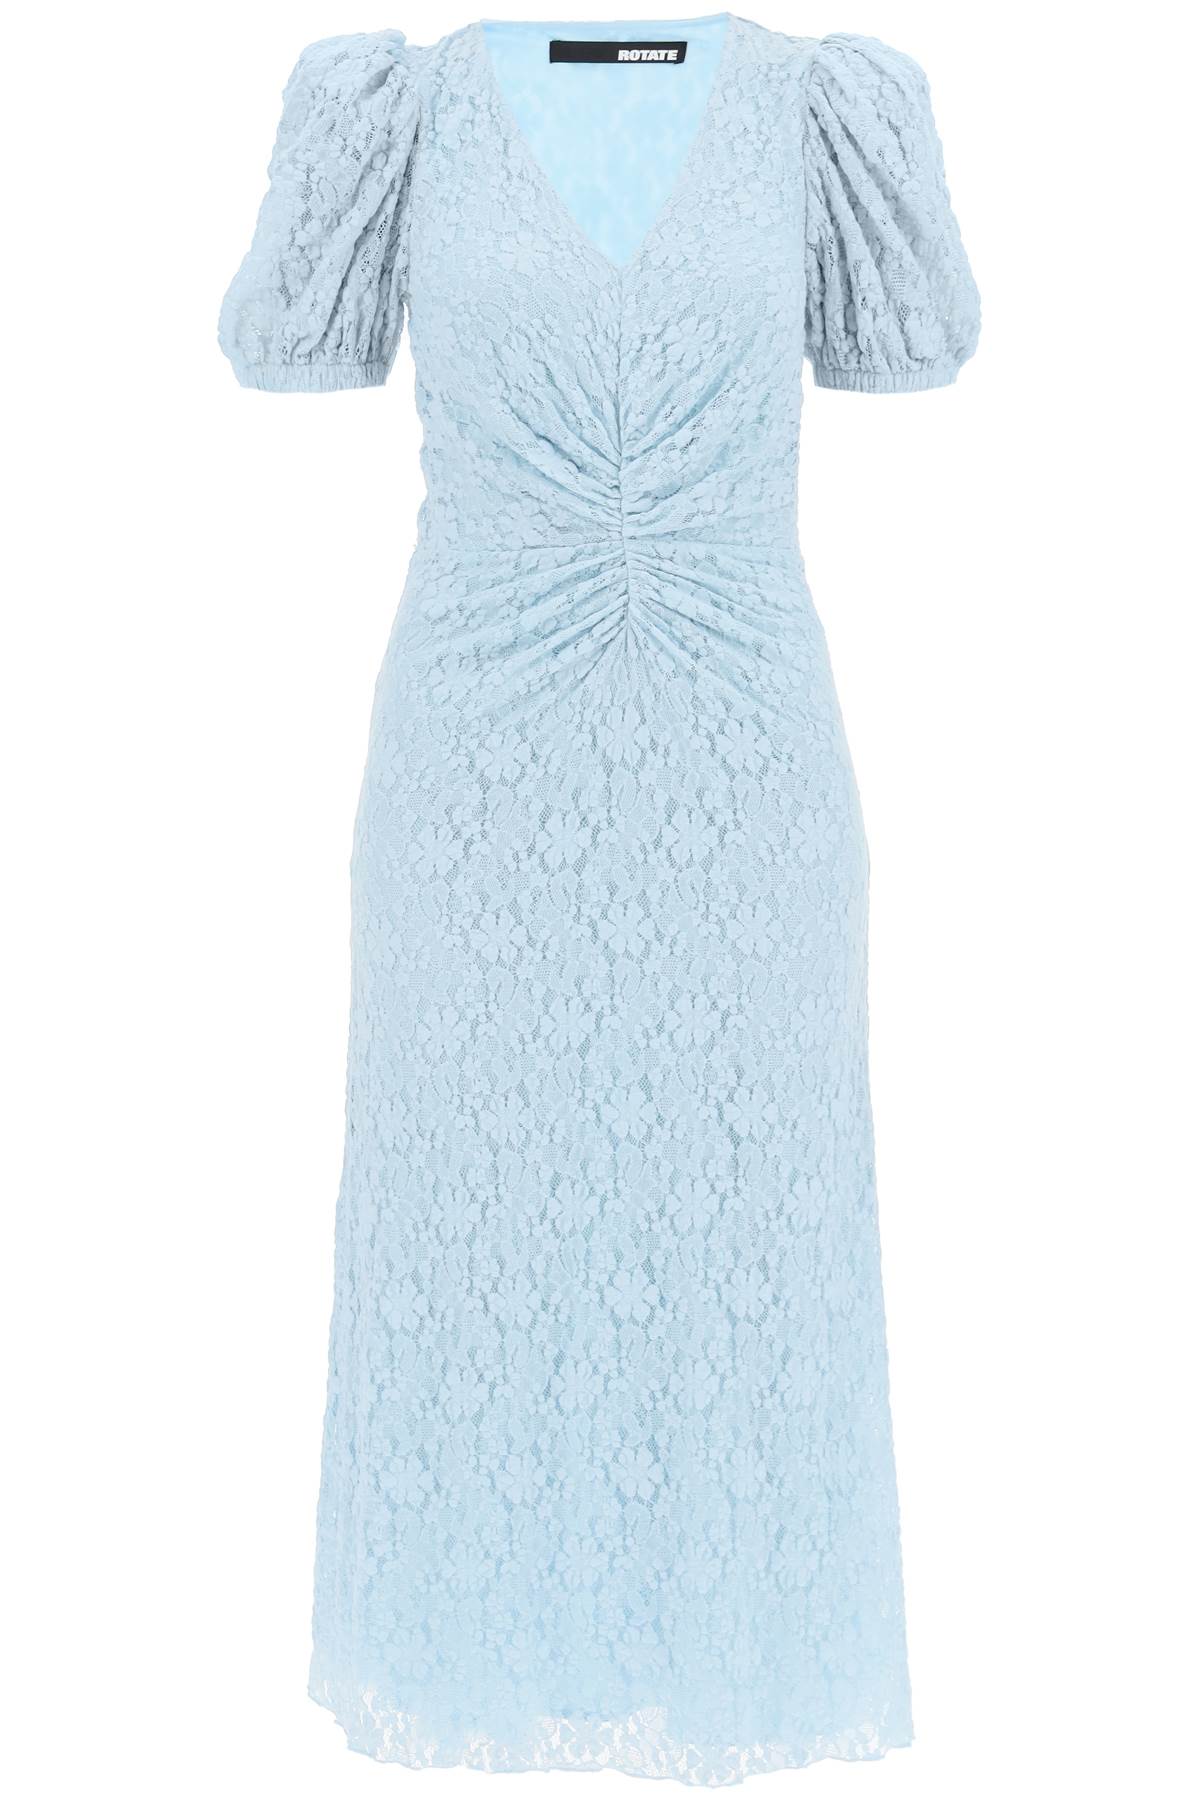 Rotate midi lace dress with puffed sleeves-0